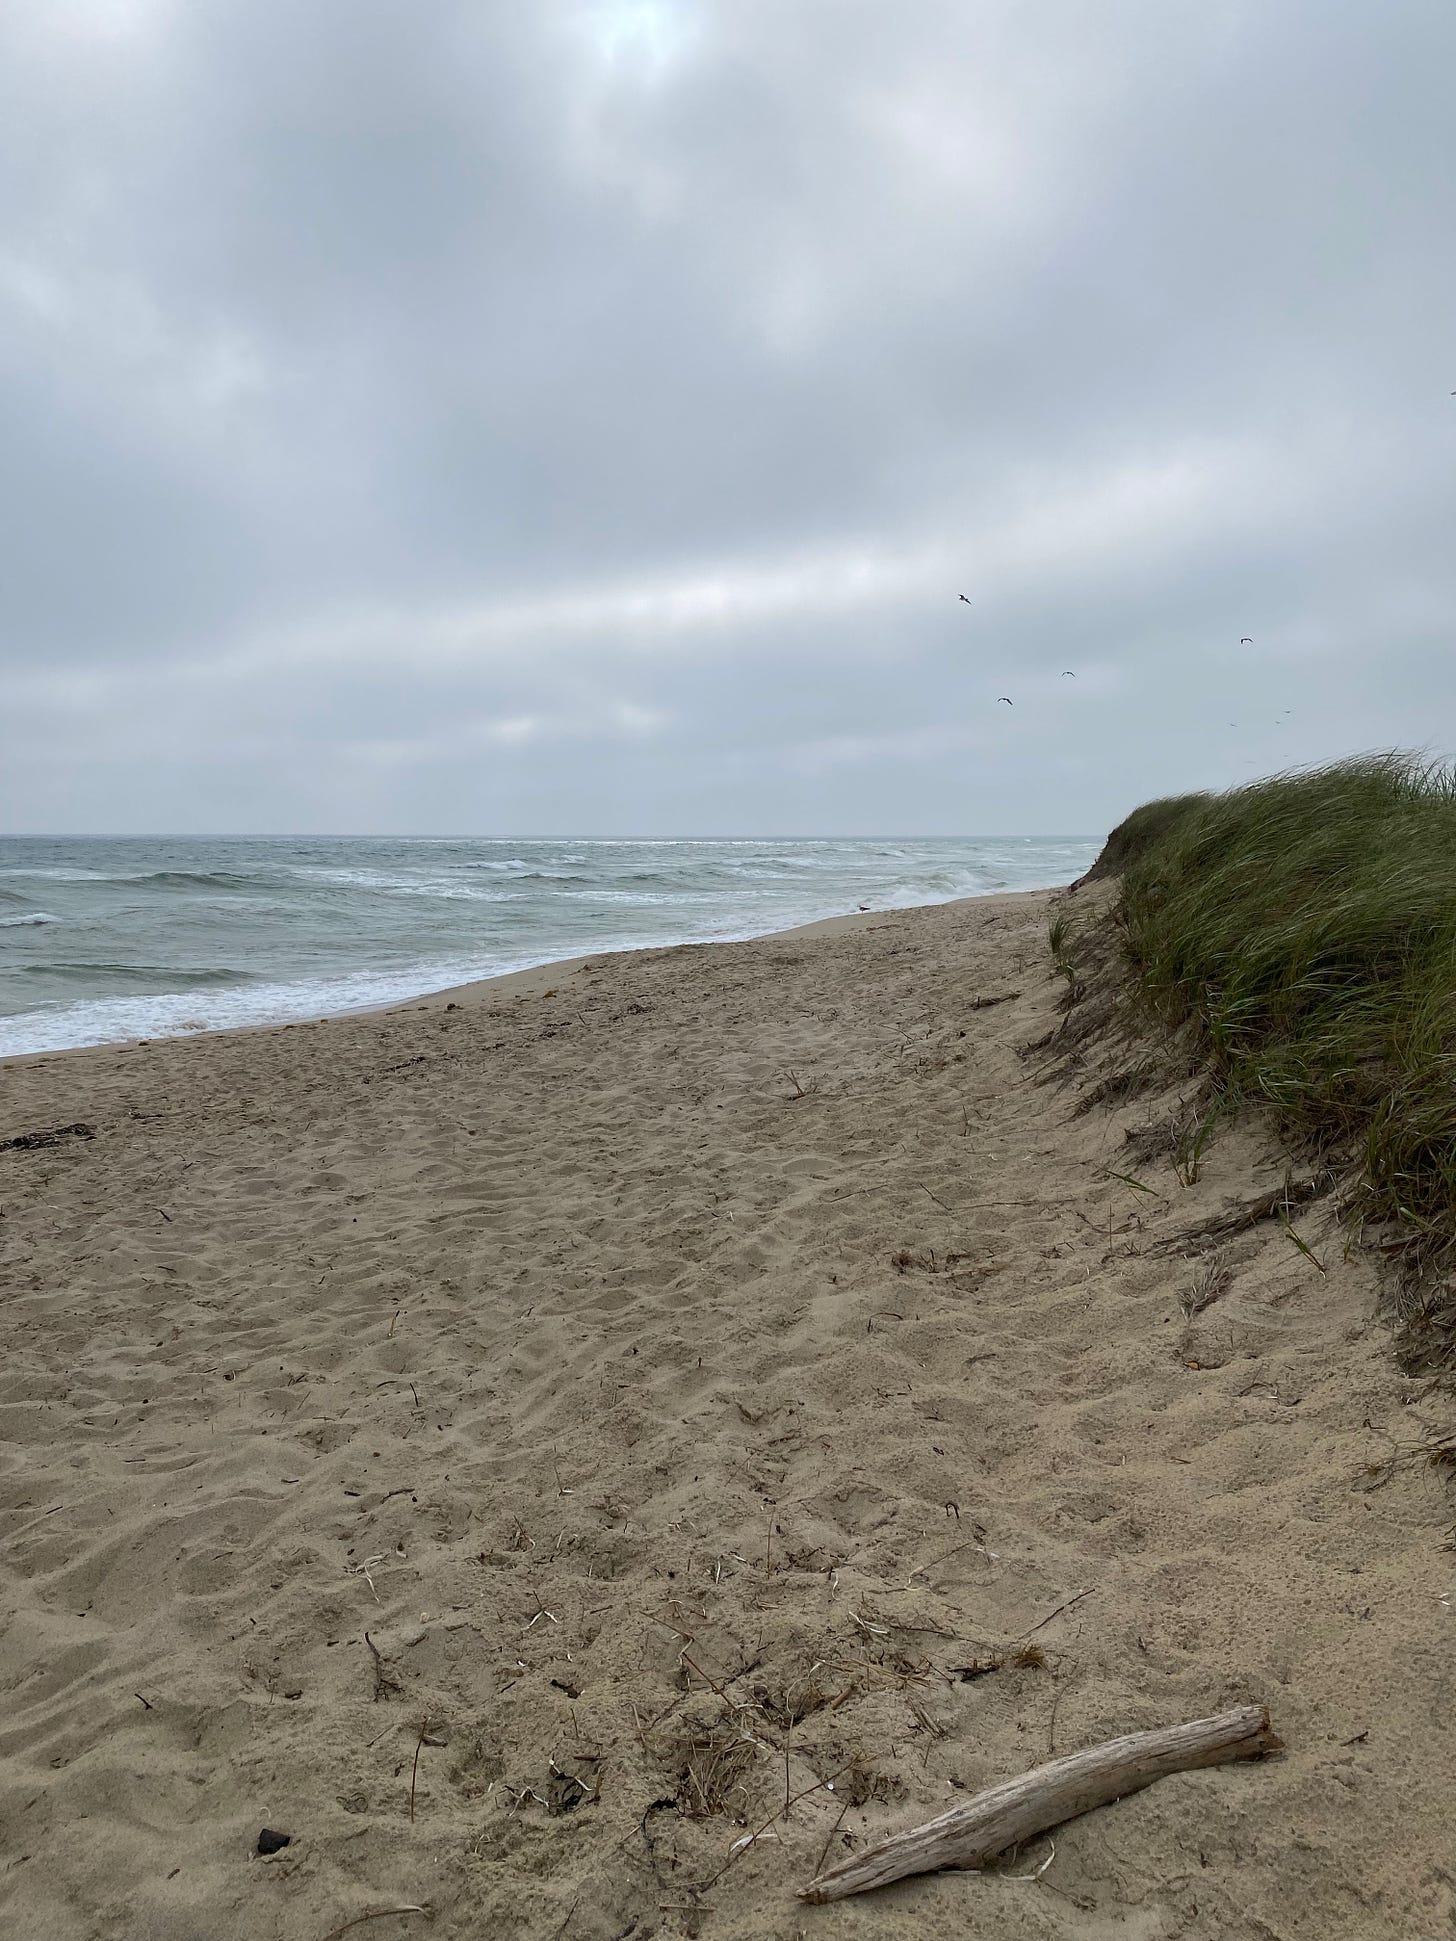 The beach on an overcast day. The waves are white and roiling; the grass on the dune is blowing in the wind.